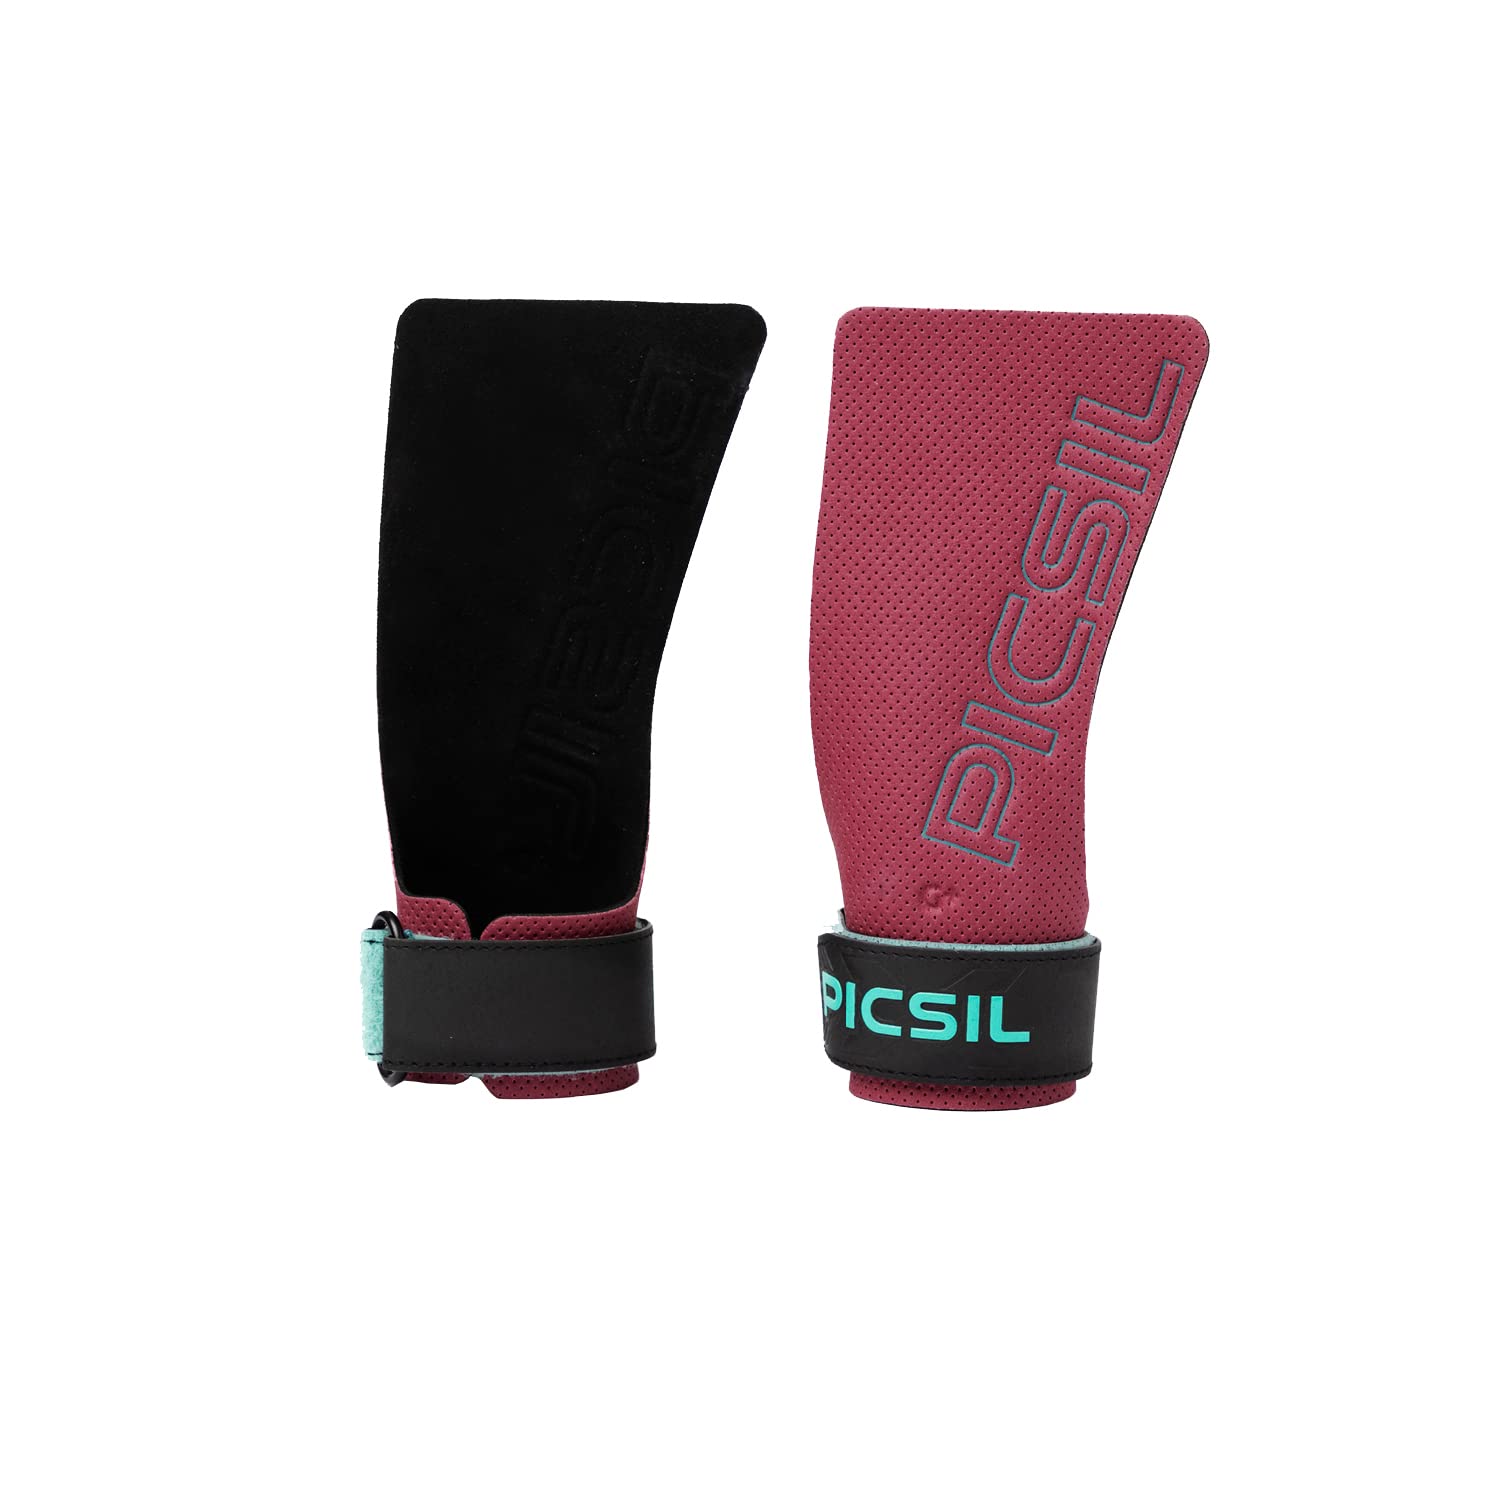 New offers section available - PicSil Sport